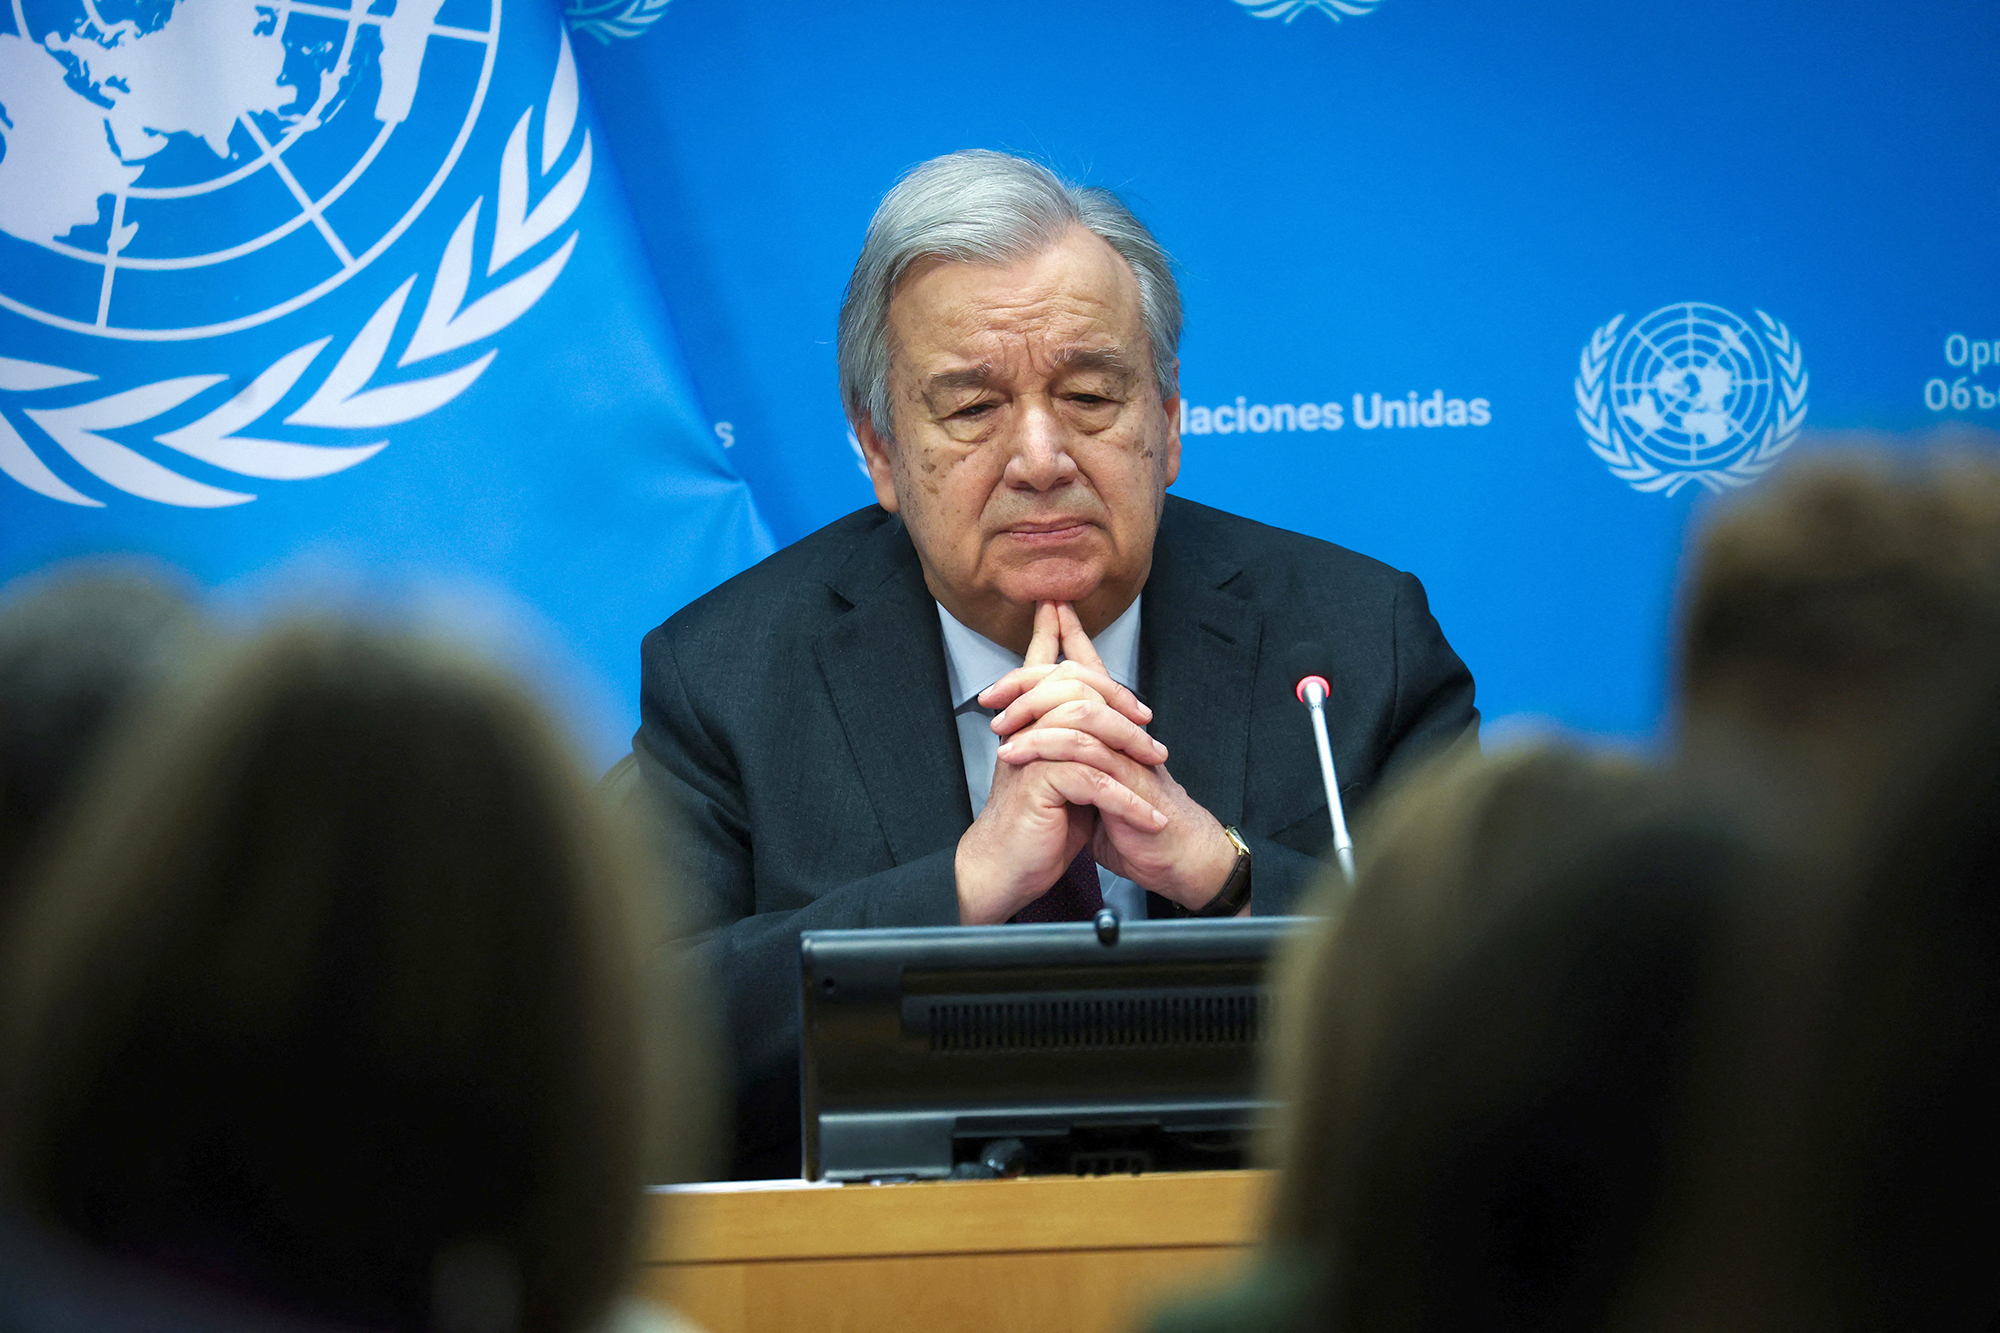 United Nations Secretary General Antonio Guterres attends a press conference at U.N. headquarters in New York City, on February 8.